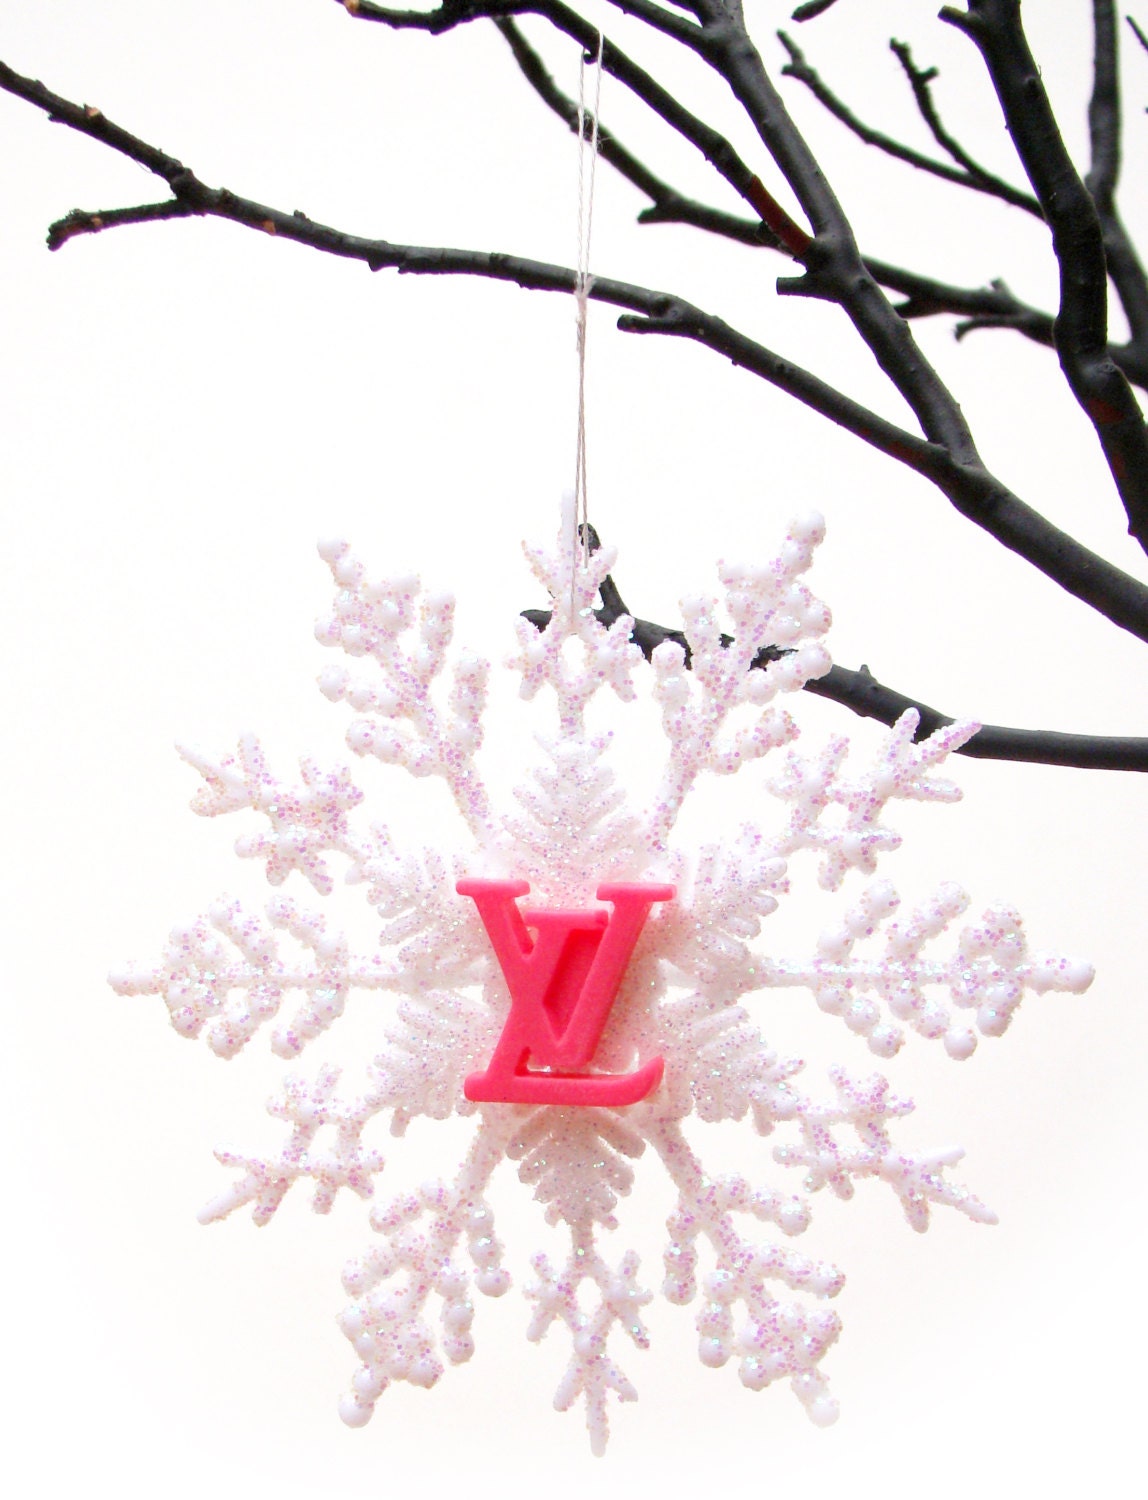 Louis Vuitton Snowflake Ornament Hot Pink FREE by NerdyGirlCouture